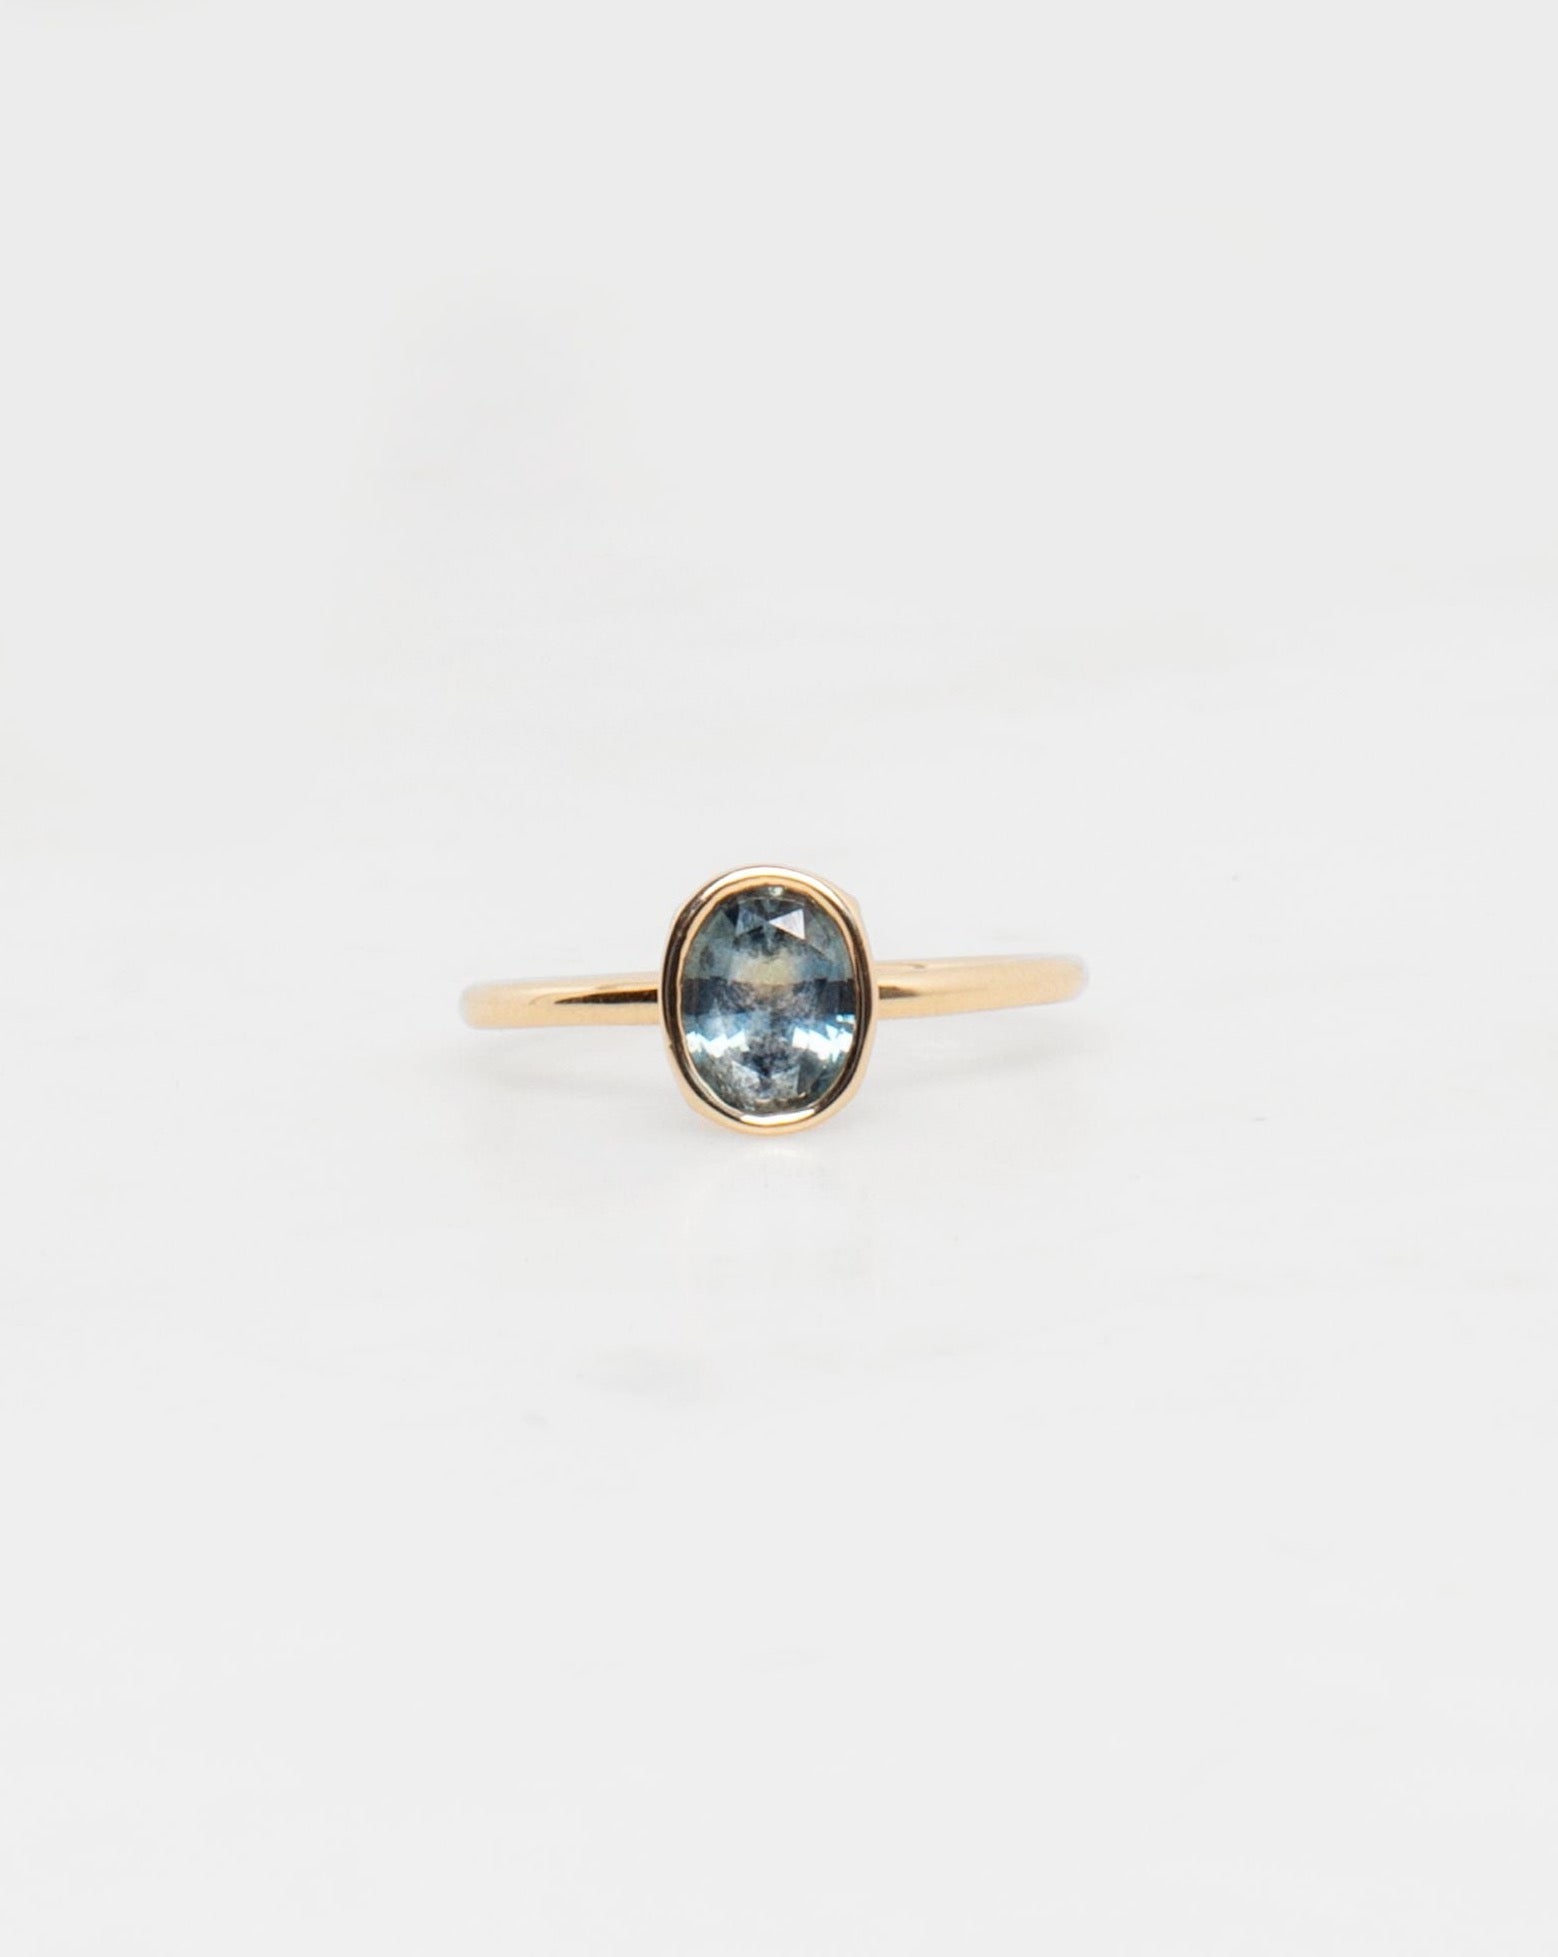 Petrichor Sapphire Floating Ring